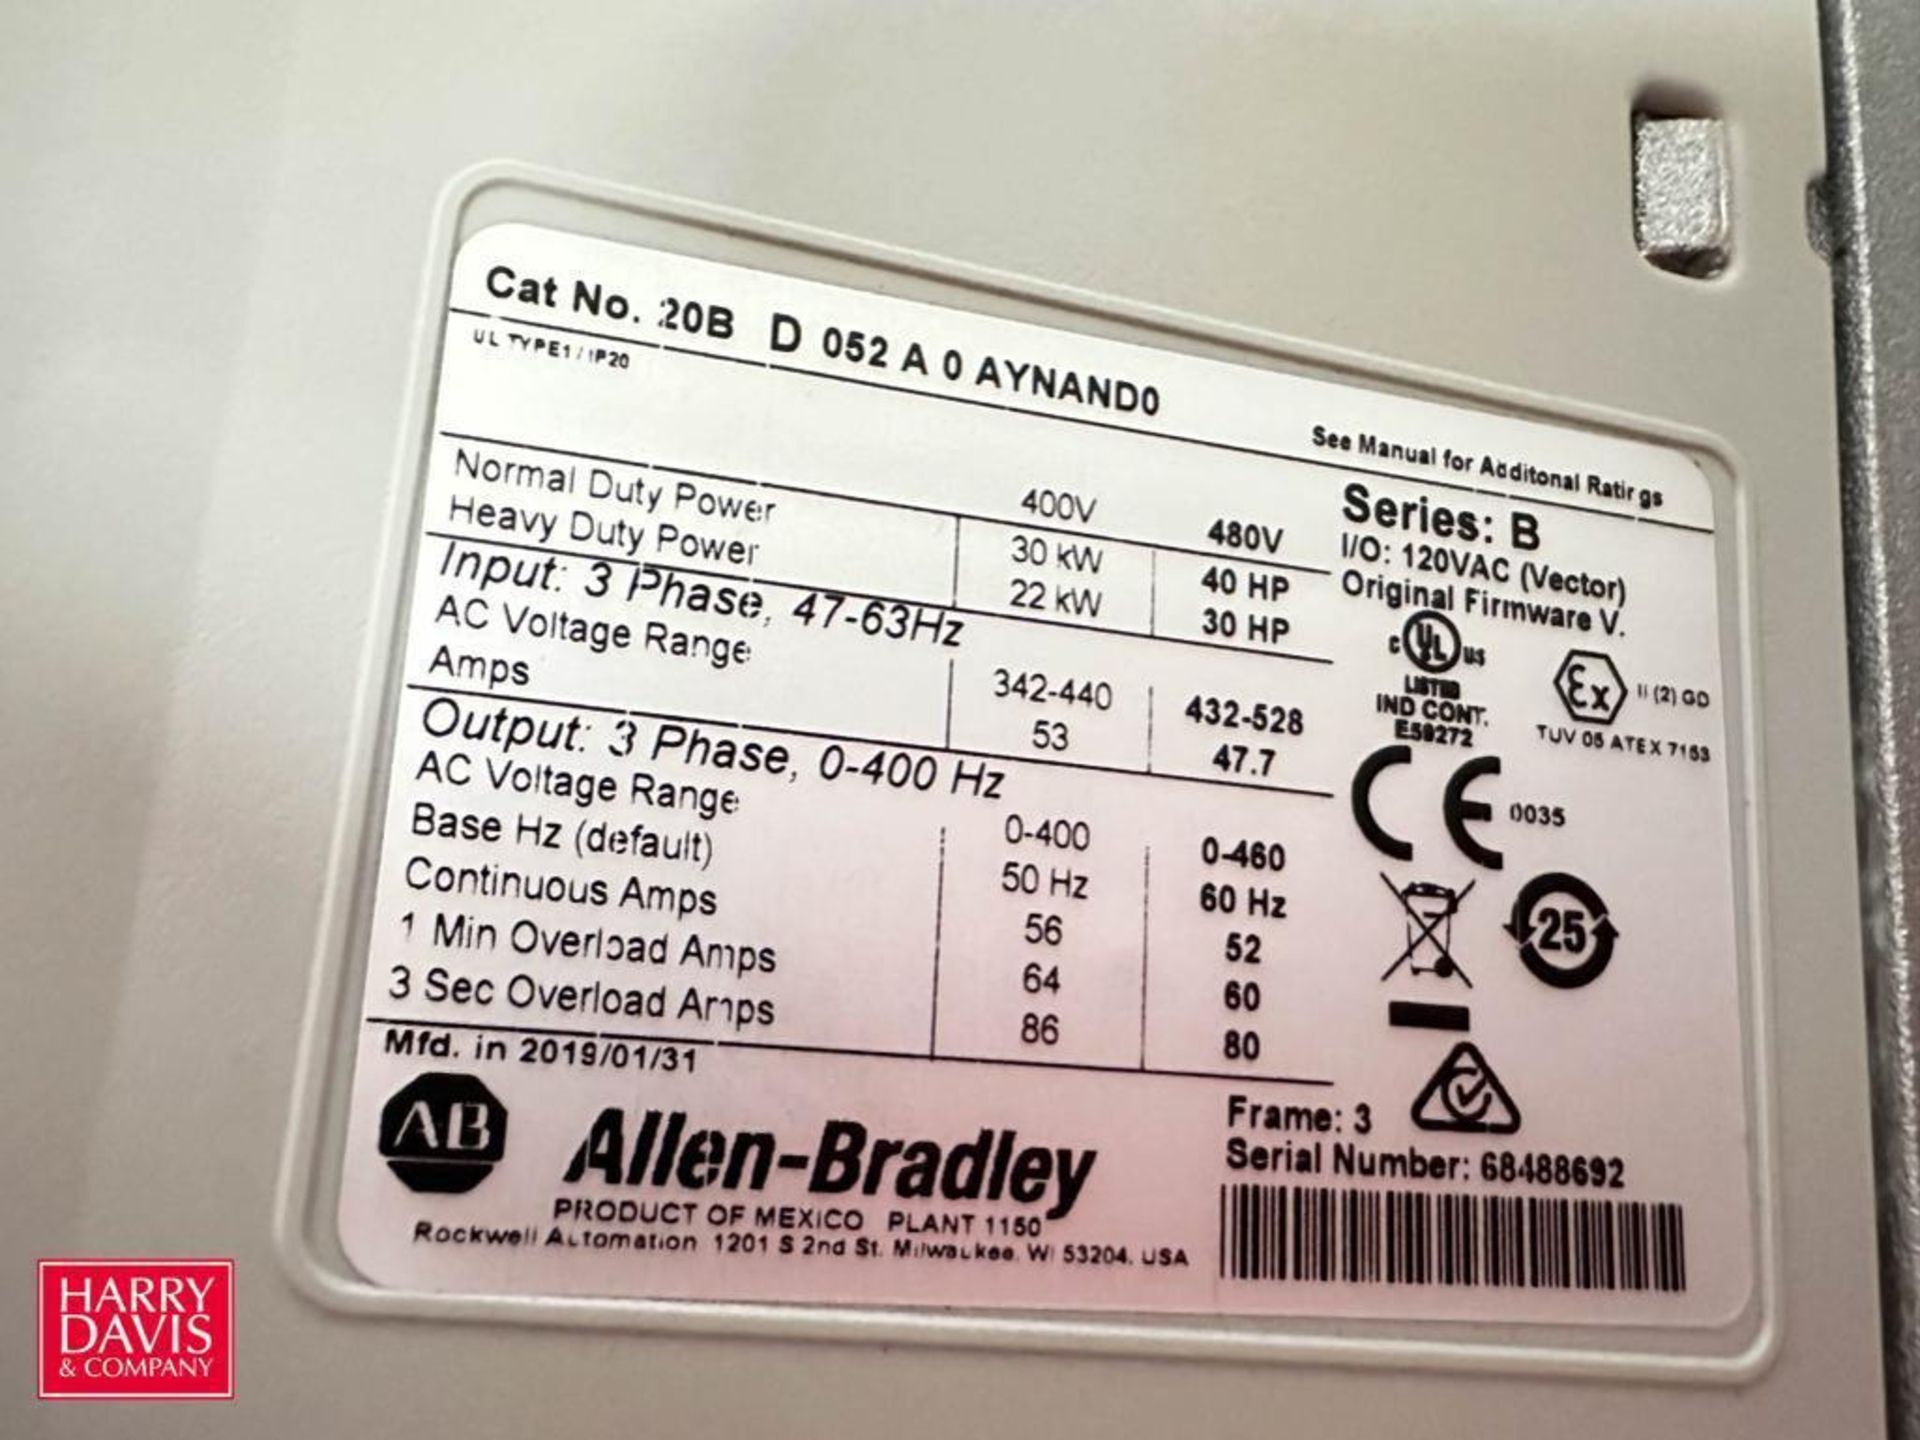 Allen-Bradley 40 HP PowerFlex 700 Variable-Frequency Drive - Rigging Fee: $75 - Image 2 of 2